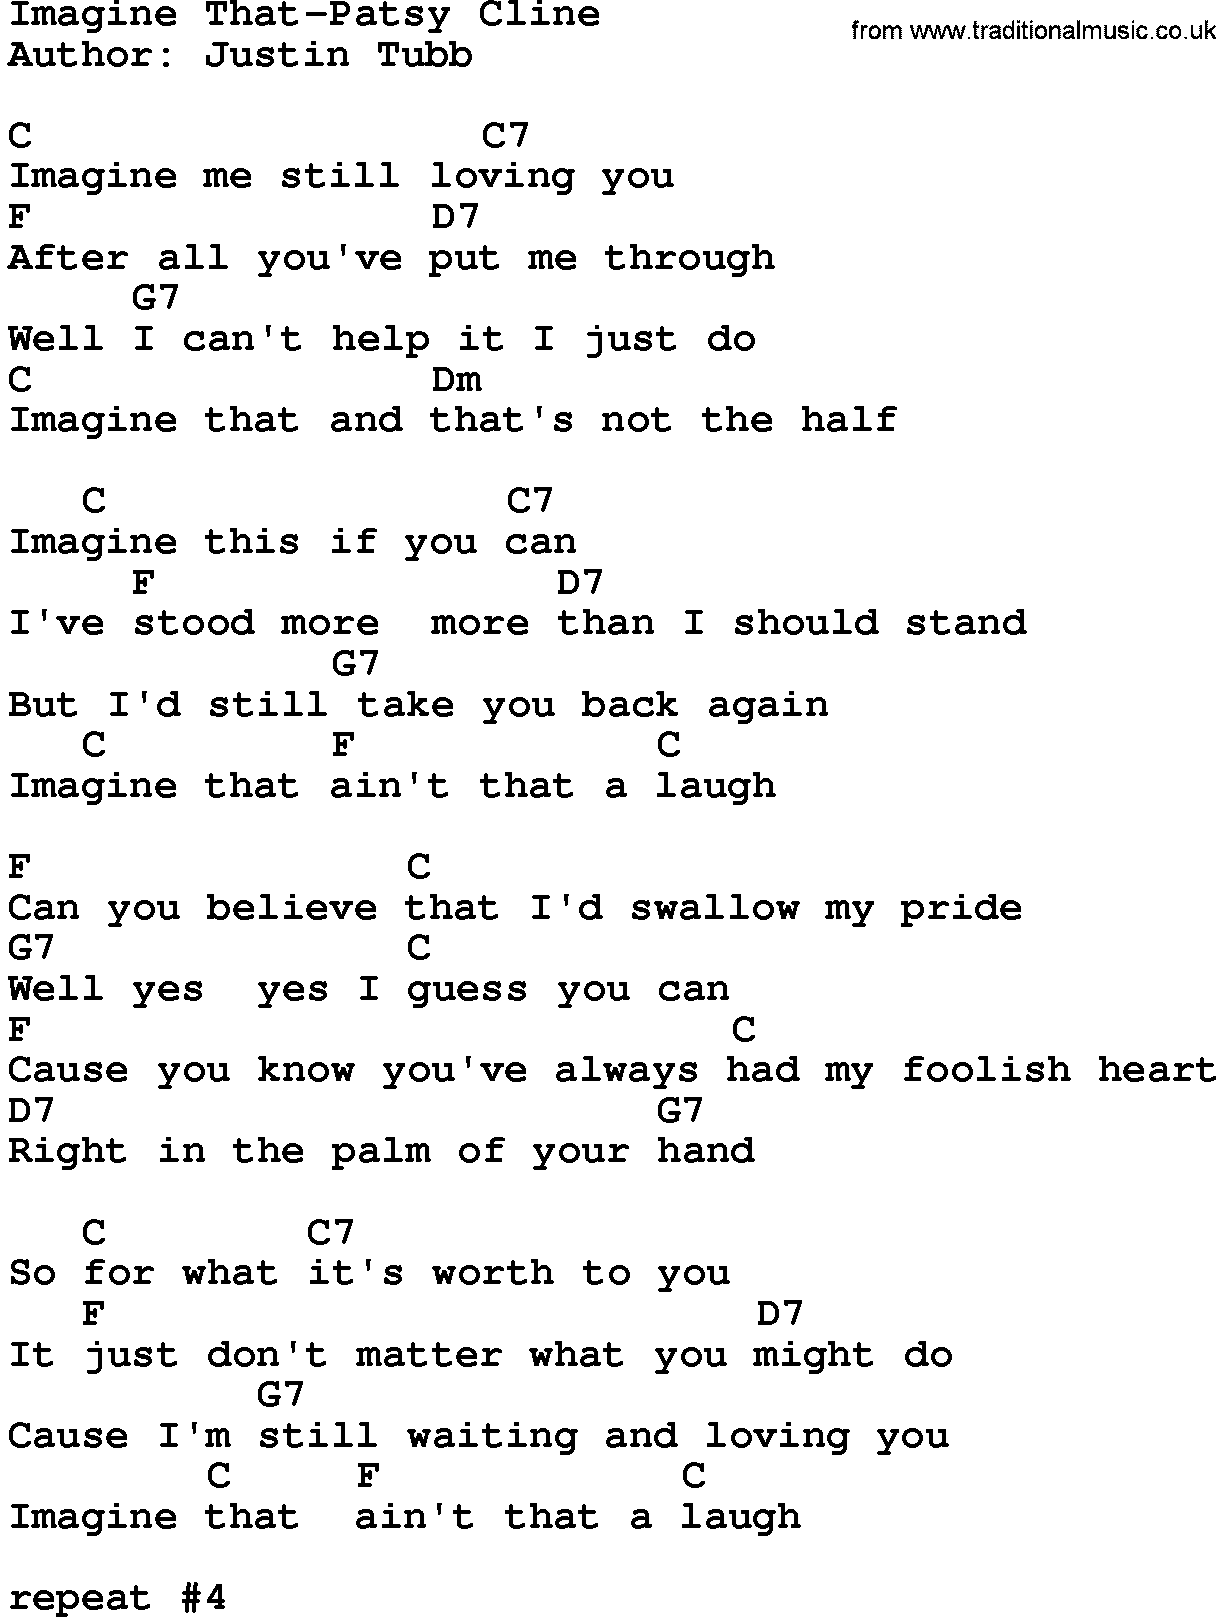 Country music song: Imagine That-Patsy Cline lyrics and chords